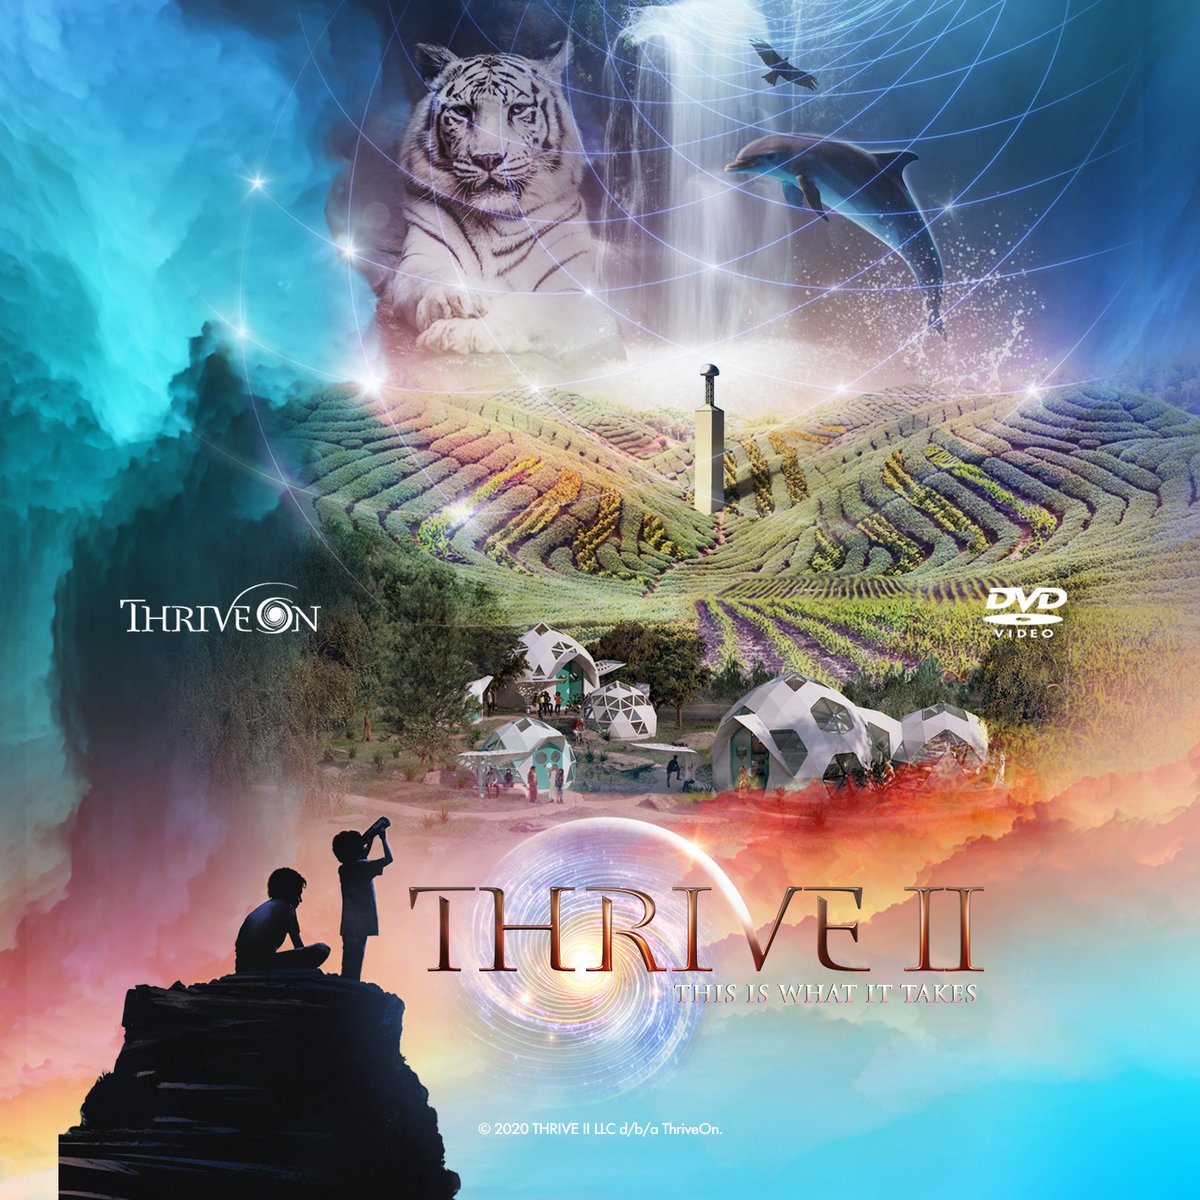 Thrive II built upon the foundations of the original documentary by utilizing the spiritual and scientific principles discussed to discover real world applications that will create a Thriving world. Watch both films for free today at freetothrive.com #freeenergy